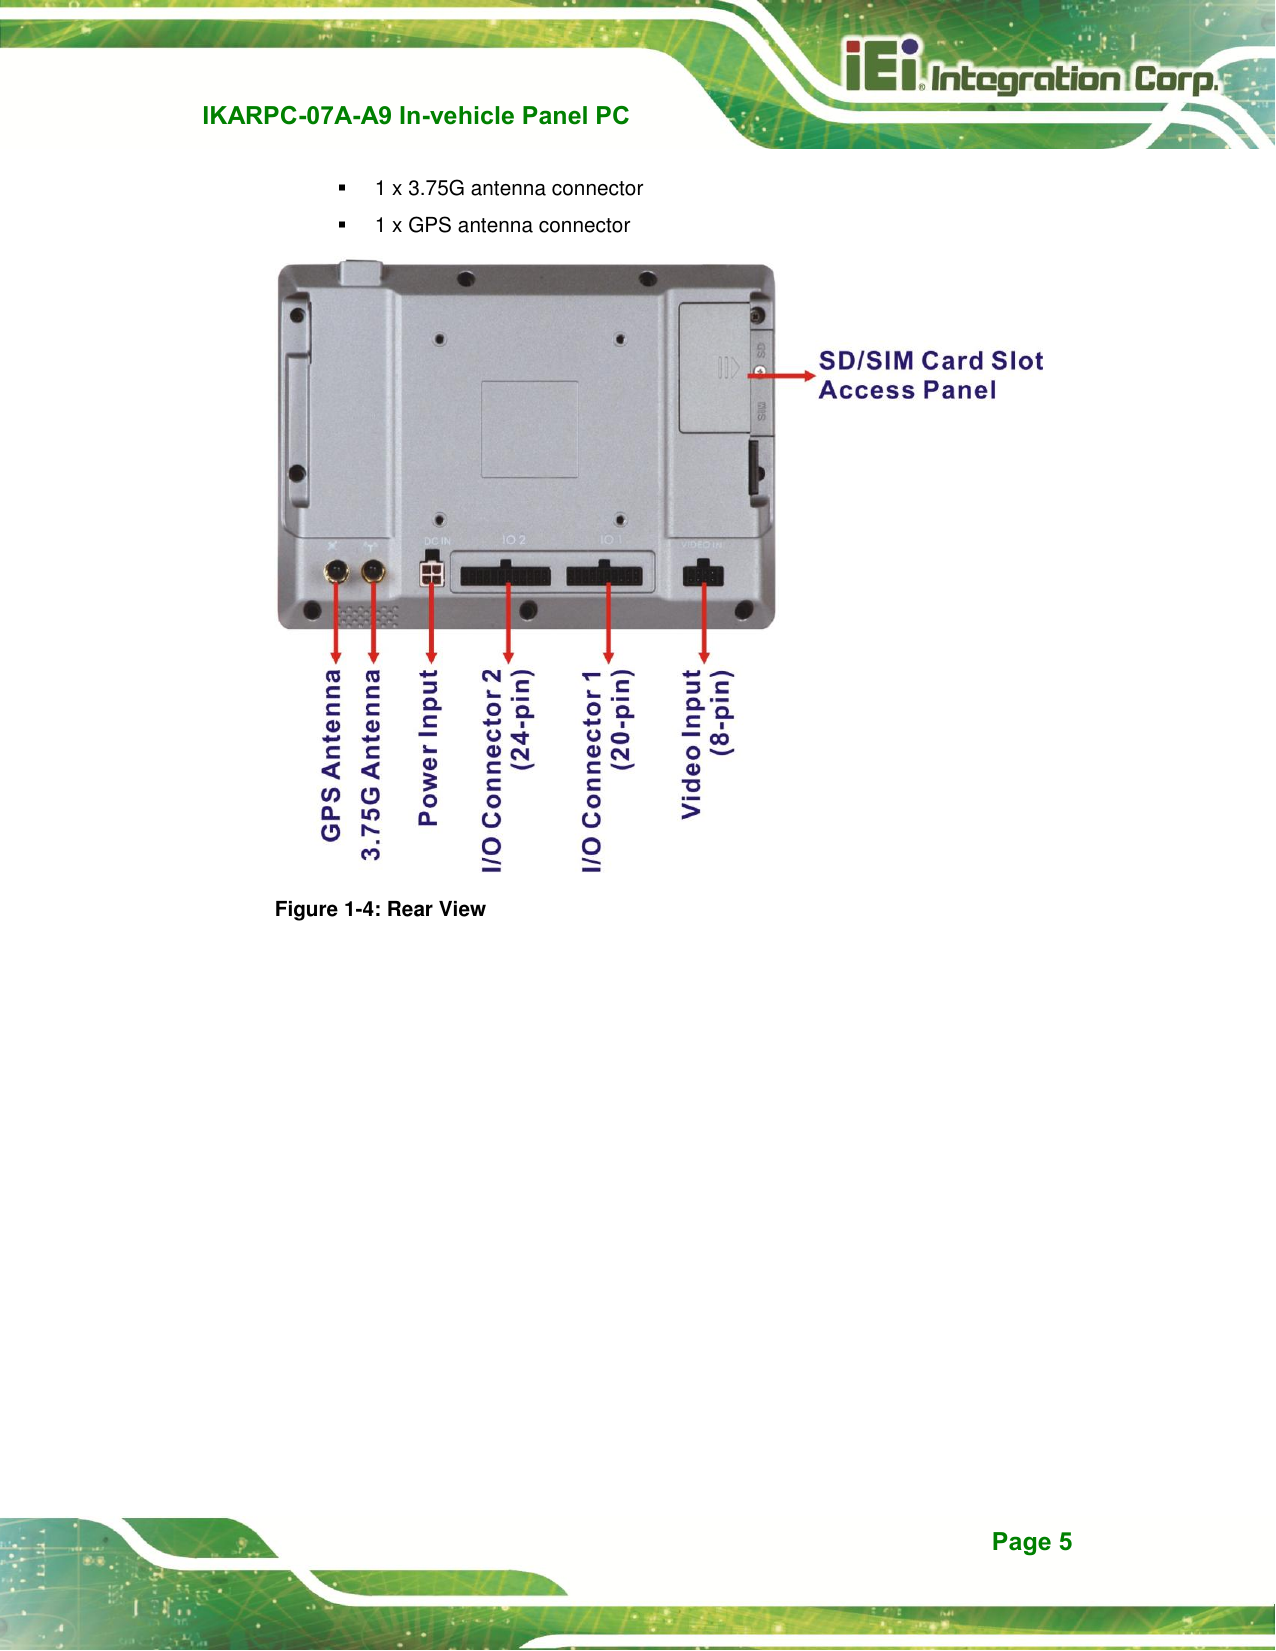   IKARPC-07A-A9 In-vehicle Panel PC  Page 5   1 x 3.75G antenna connector   1 x GPS antenna connector  Figure 1-4: Rear View 